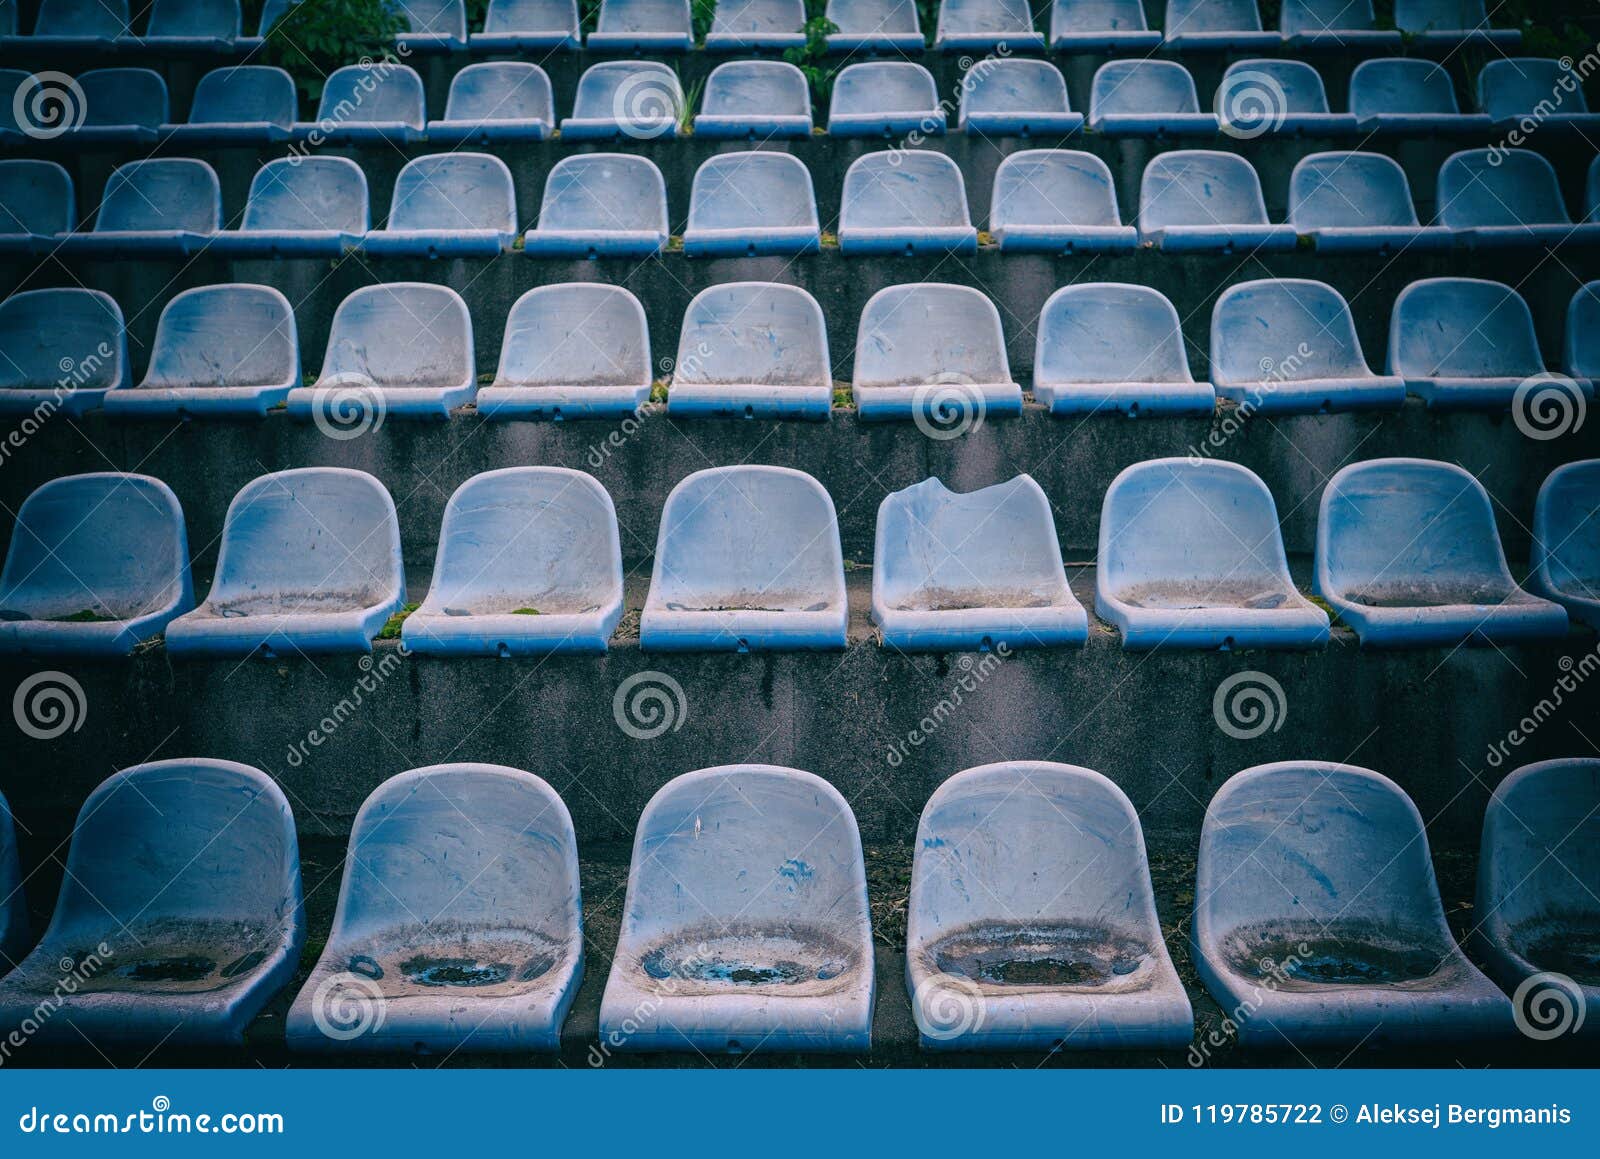 https://thumbs.dreamstime.com/z/vintage-stadium-chairs-old-time-not-used-dust-blue-color-old-empty-chairs-seats-stadium-arena-georgia-119785722.jpg